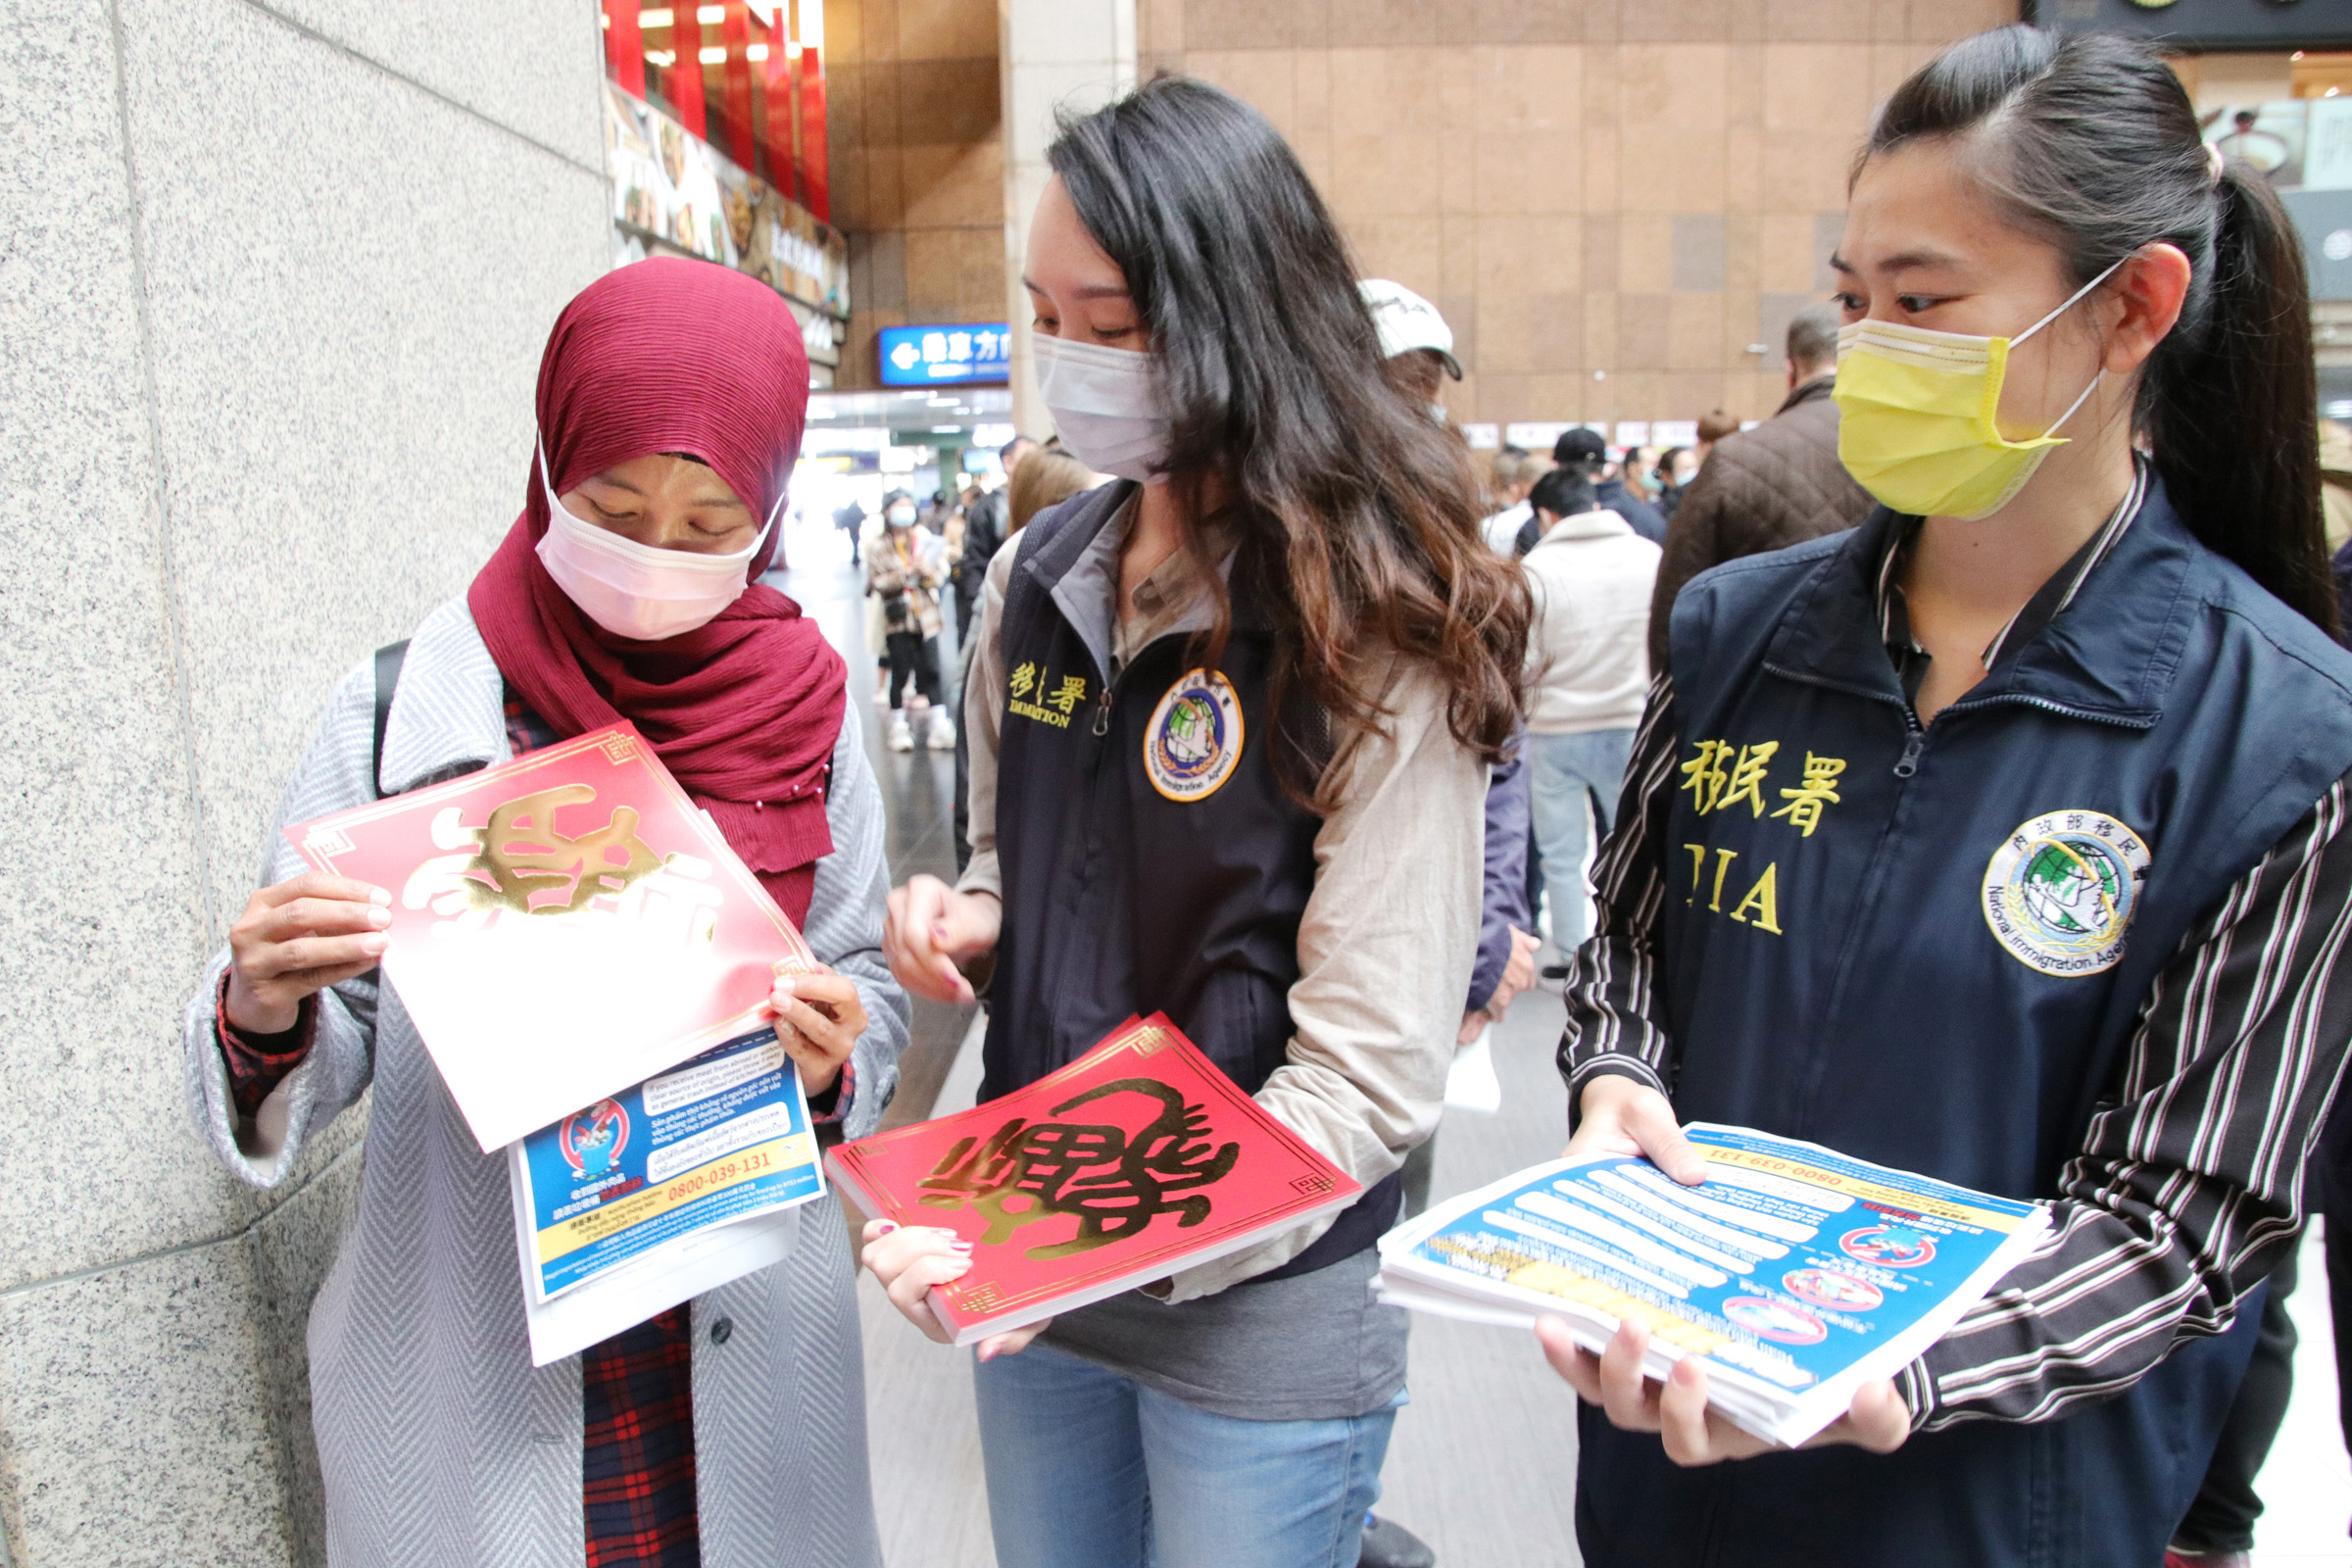 NIA promoted “Prevention of African Swine Fever” to migrant workers. (Photo / Provided by Taipei City Service Center)